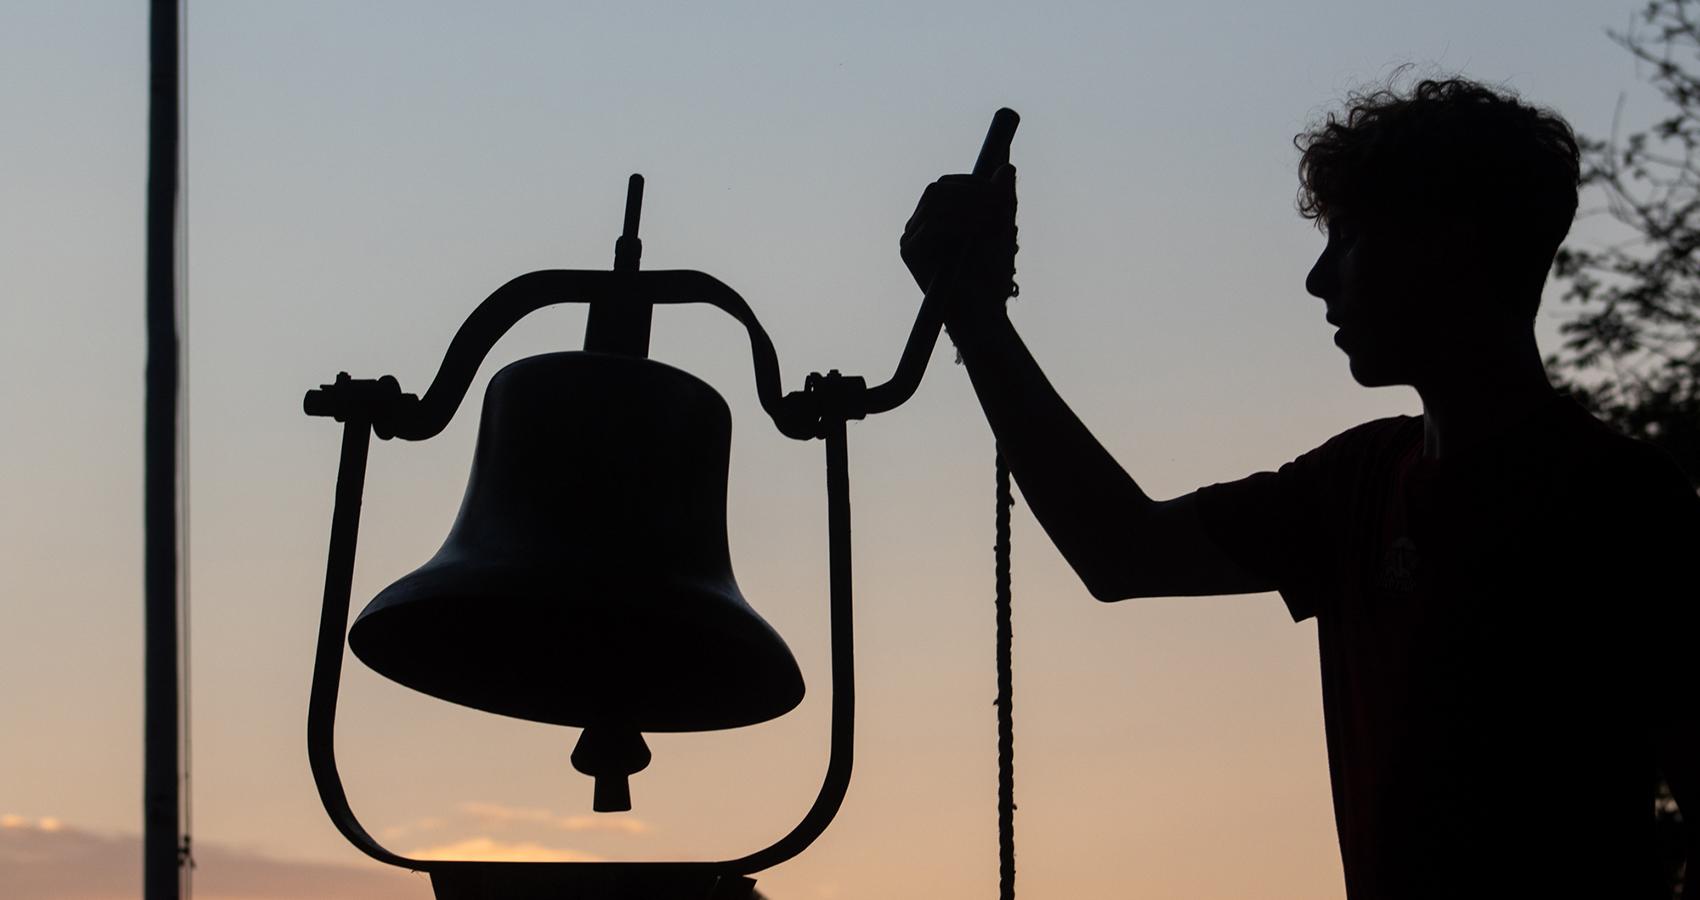 camp person ringing bell at dawn